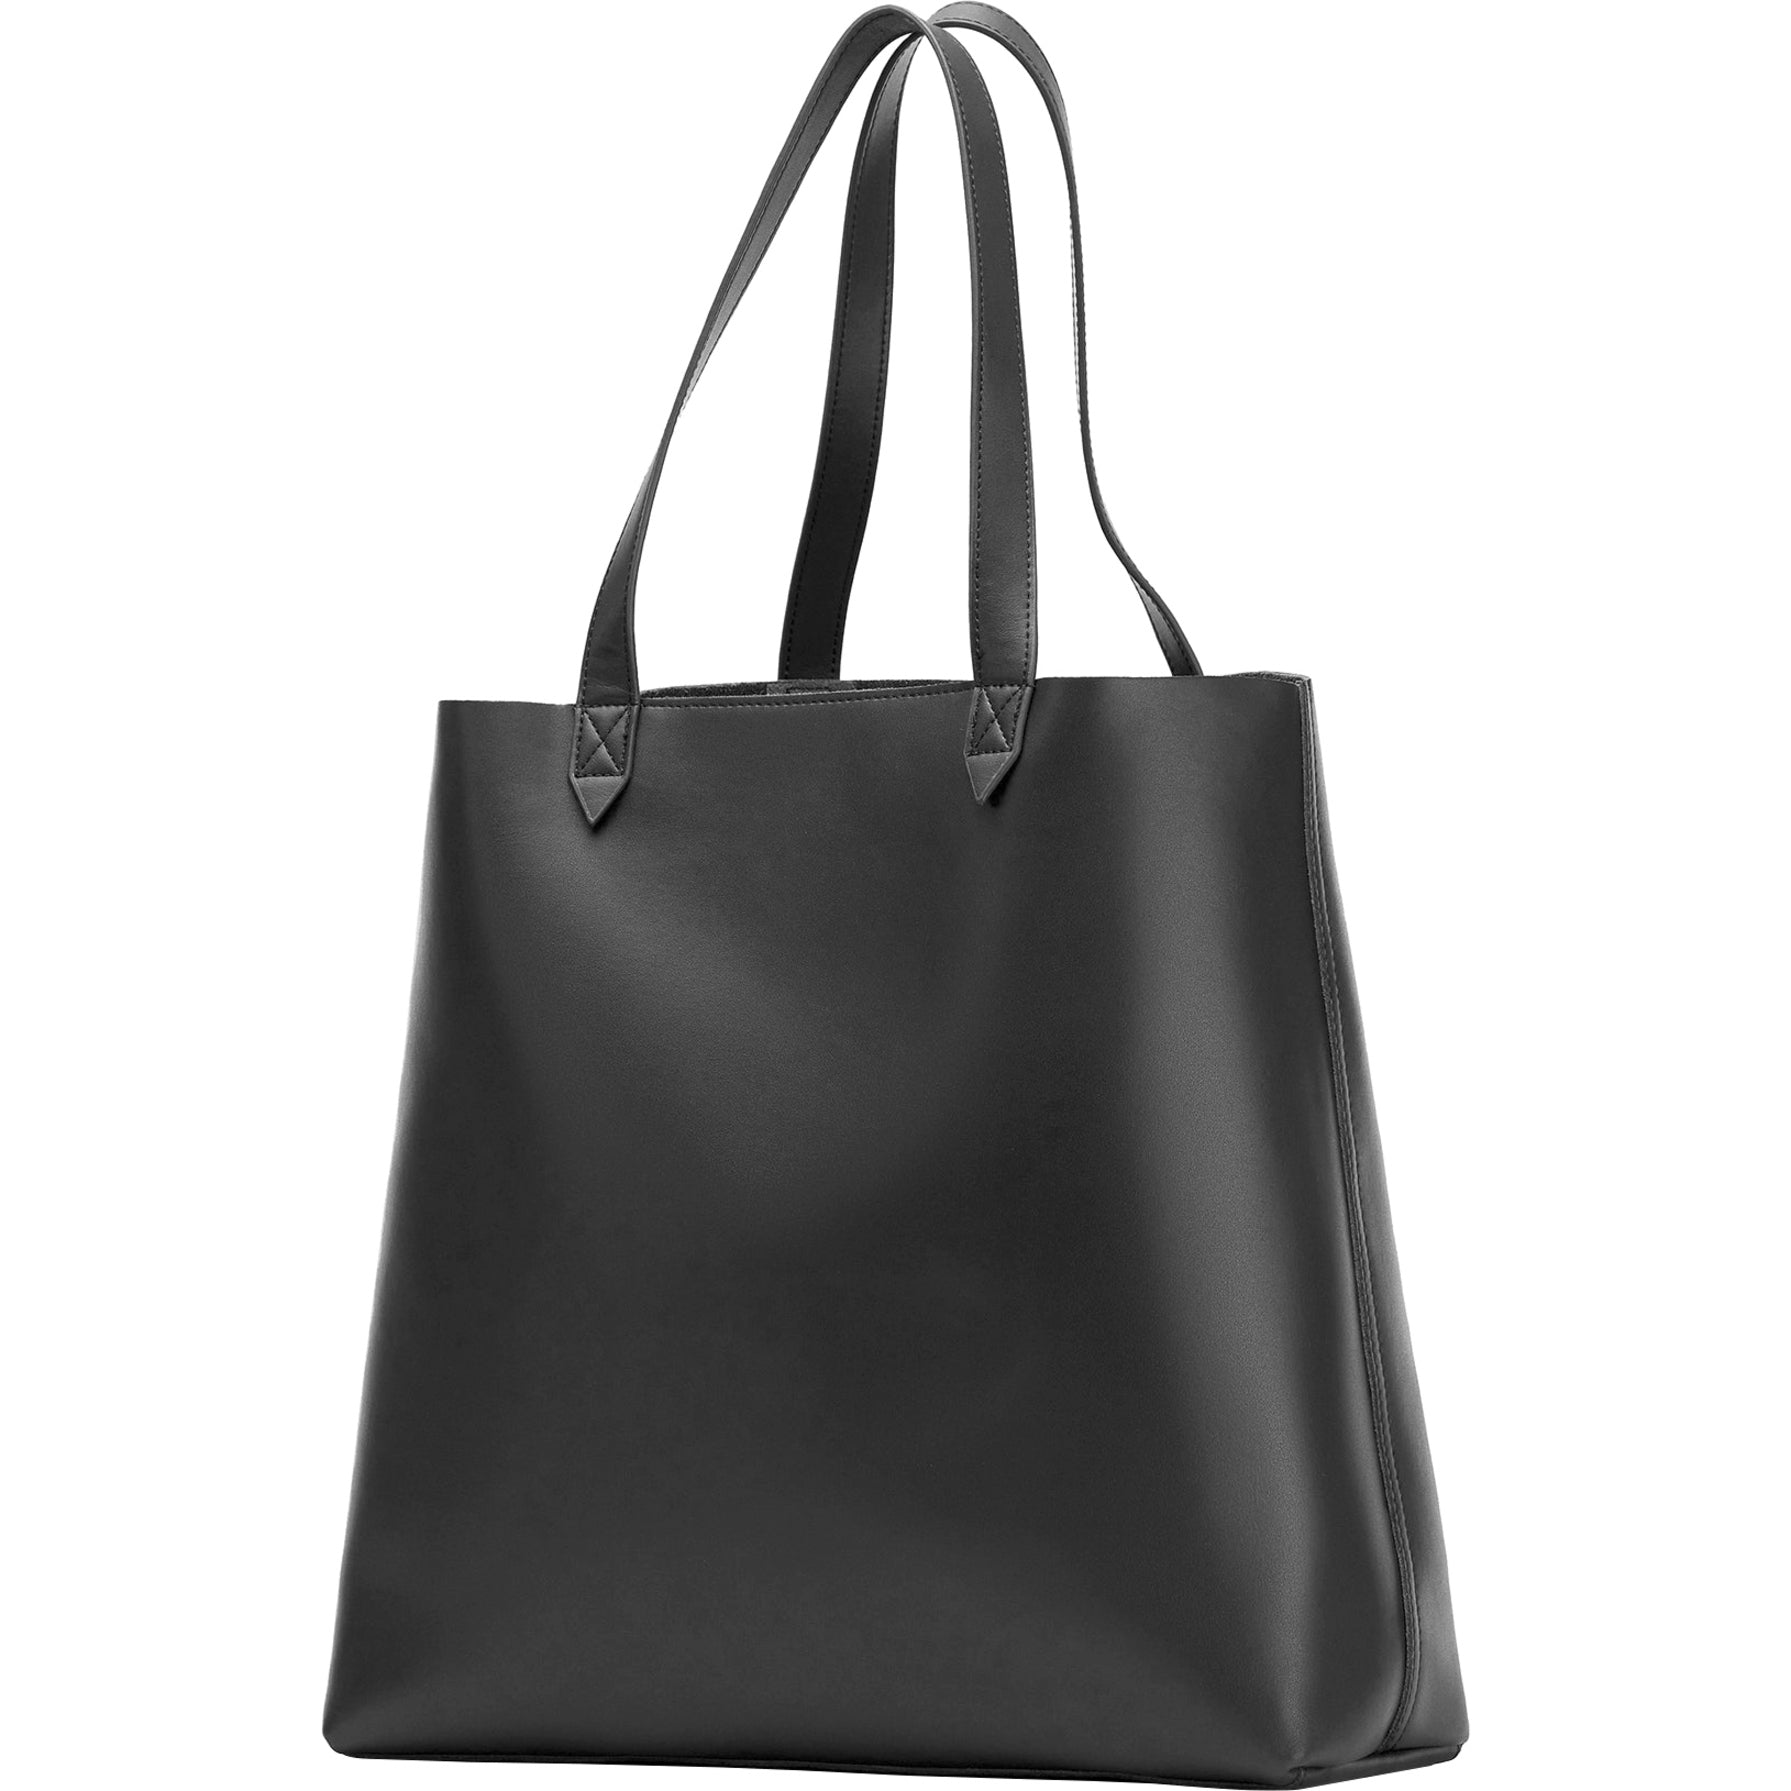 Francine Collection MADE EASY LEATHER TOTE BLACK CARRIES 15IN LAPTOP (FCTBLKMADE)